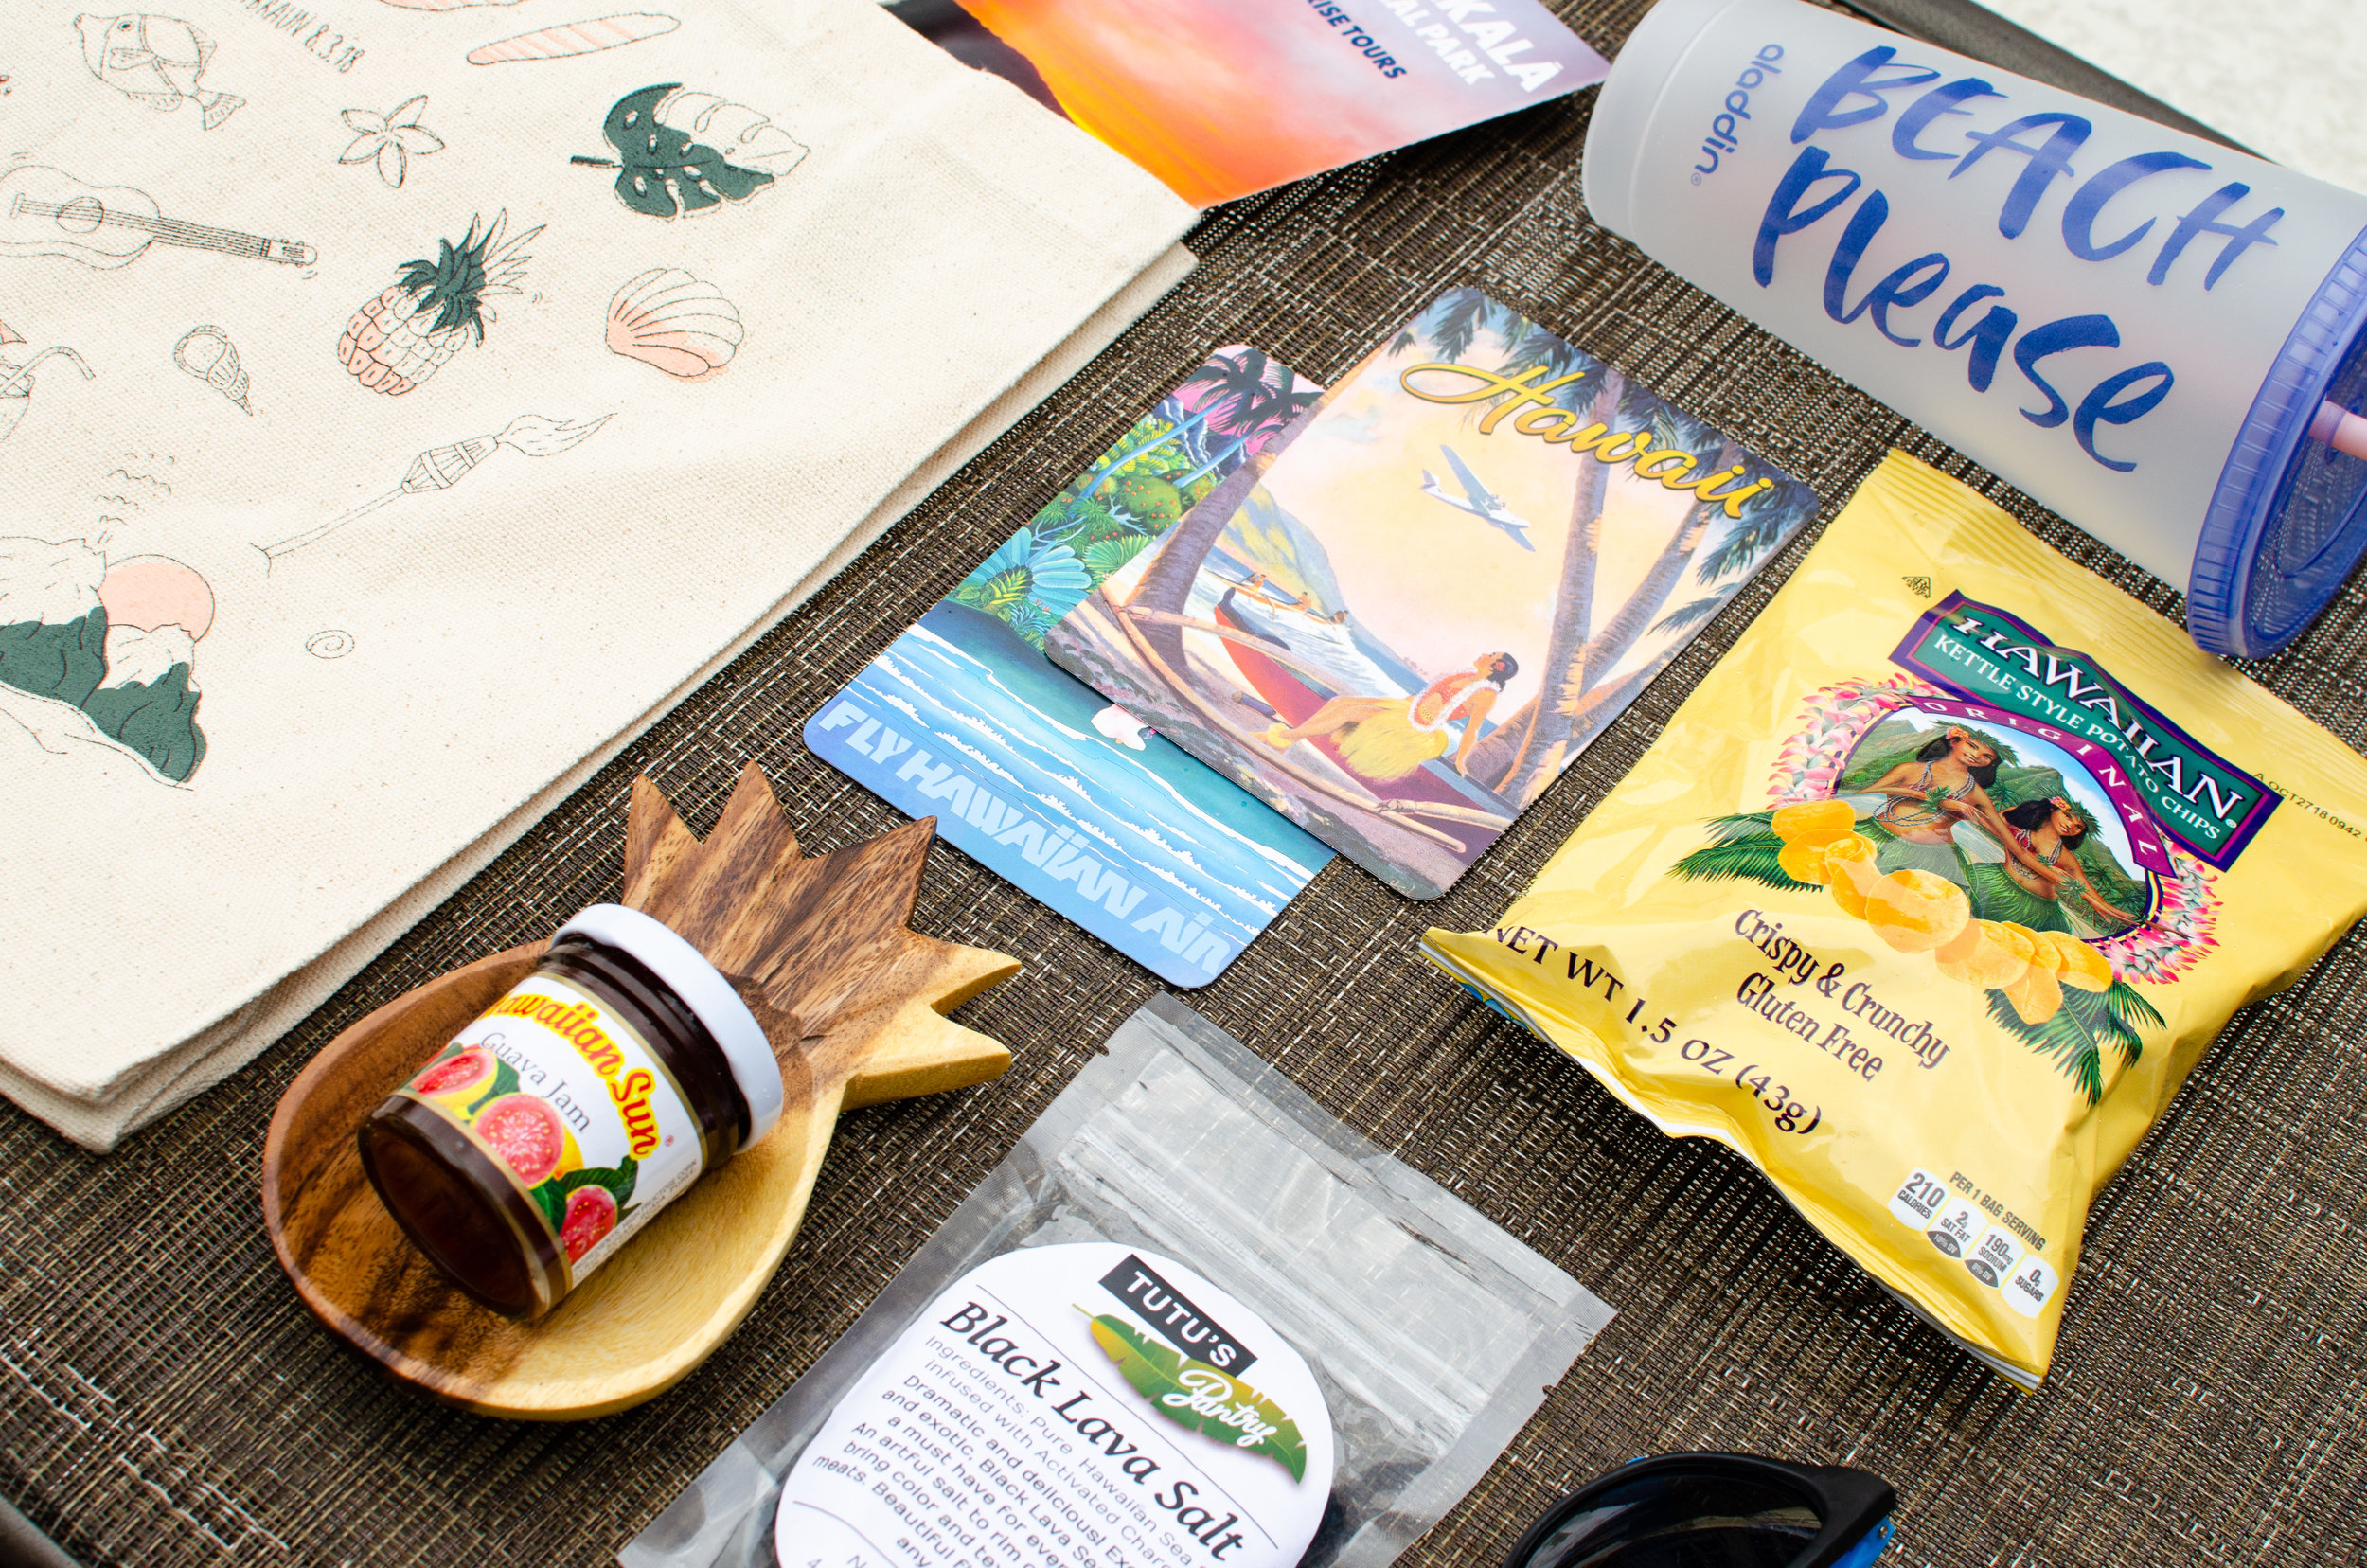 How-To: Assemble a Hawaiian-themed Welcome Bag for a Destination